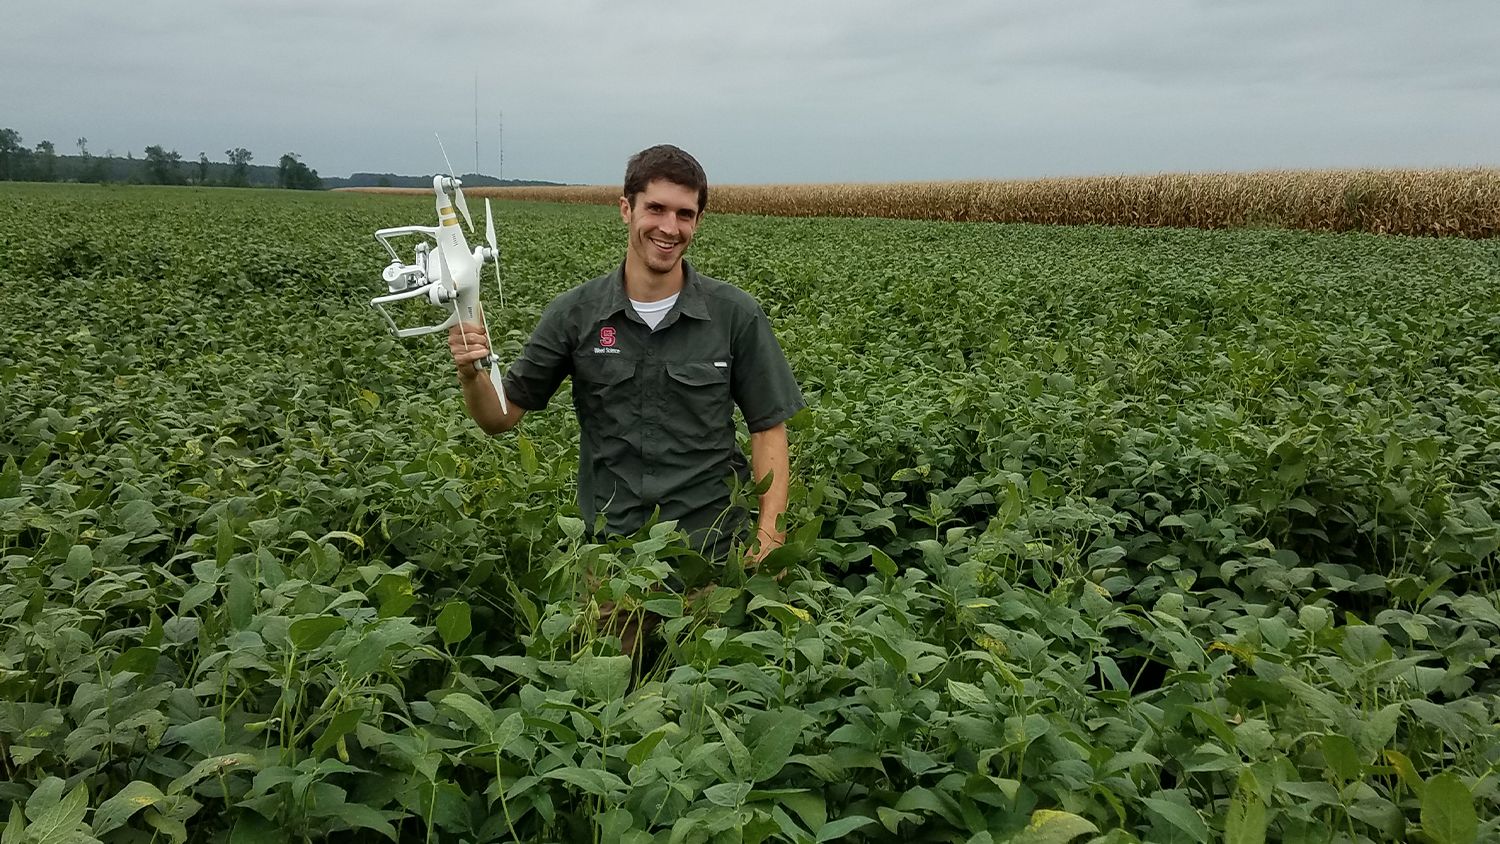 A man holding a drone in a soybean field